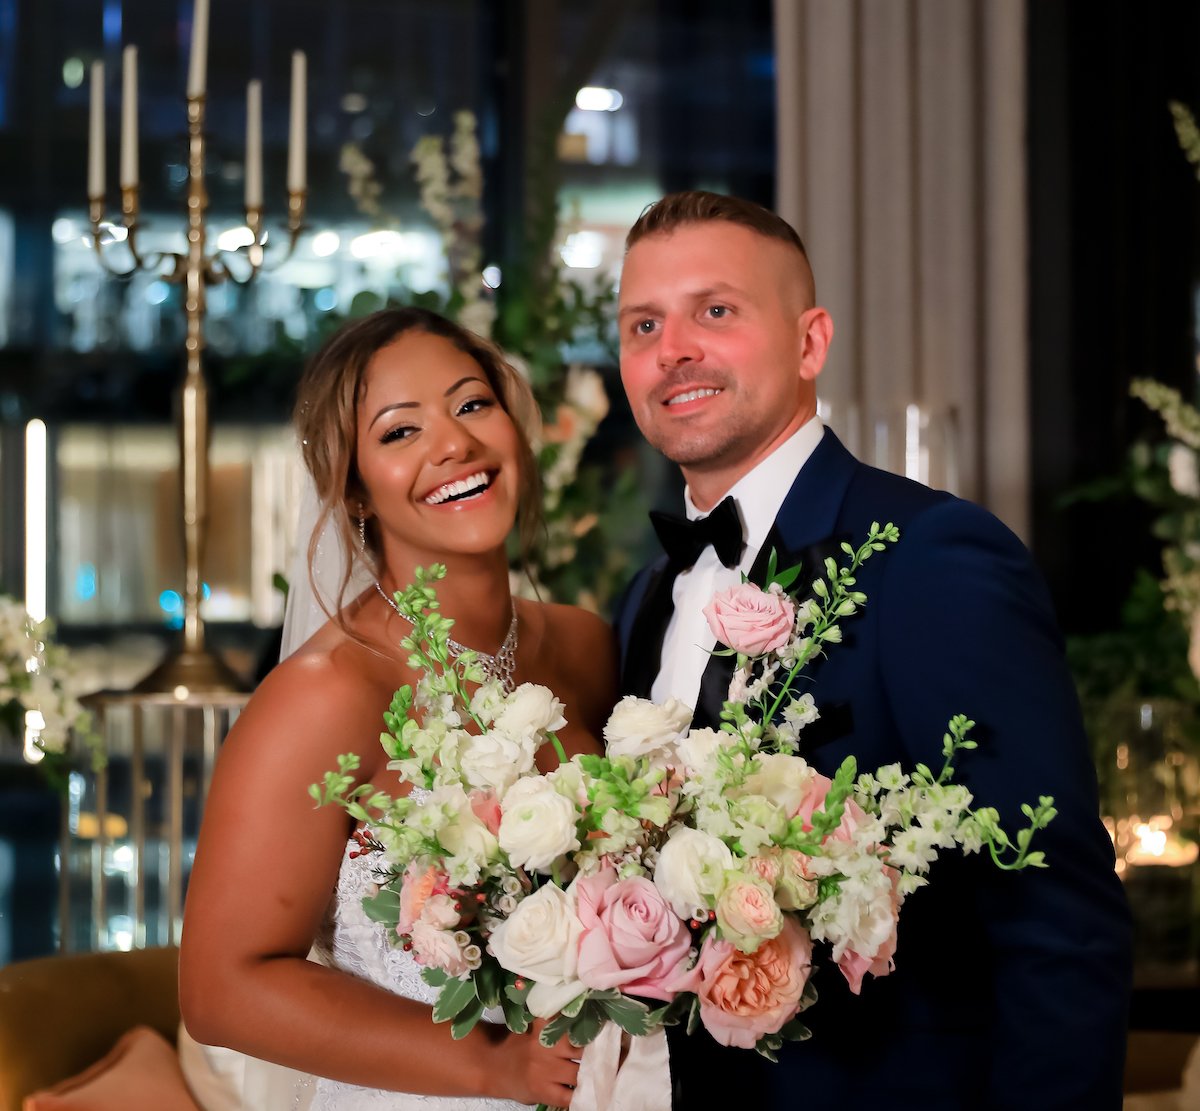 Domynique and Mackinley from 'Married at First Sight' Season 16 on their wedding day